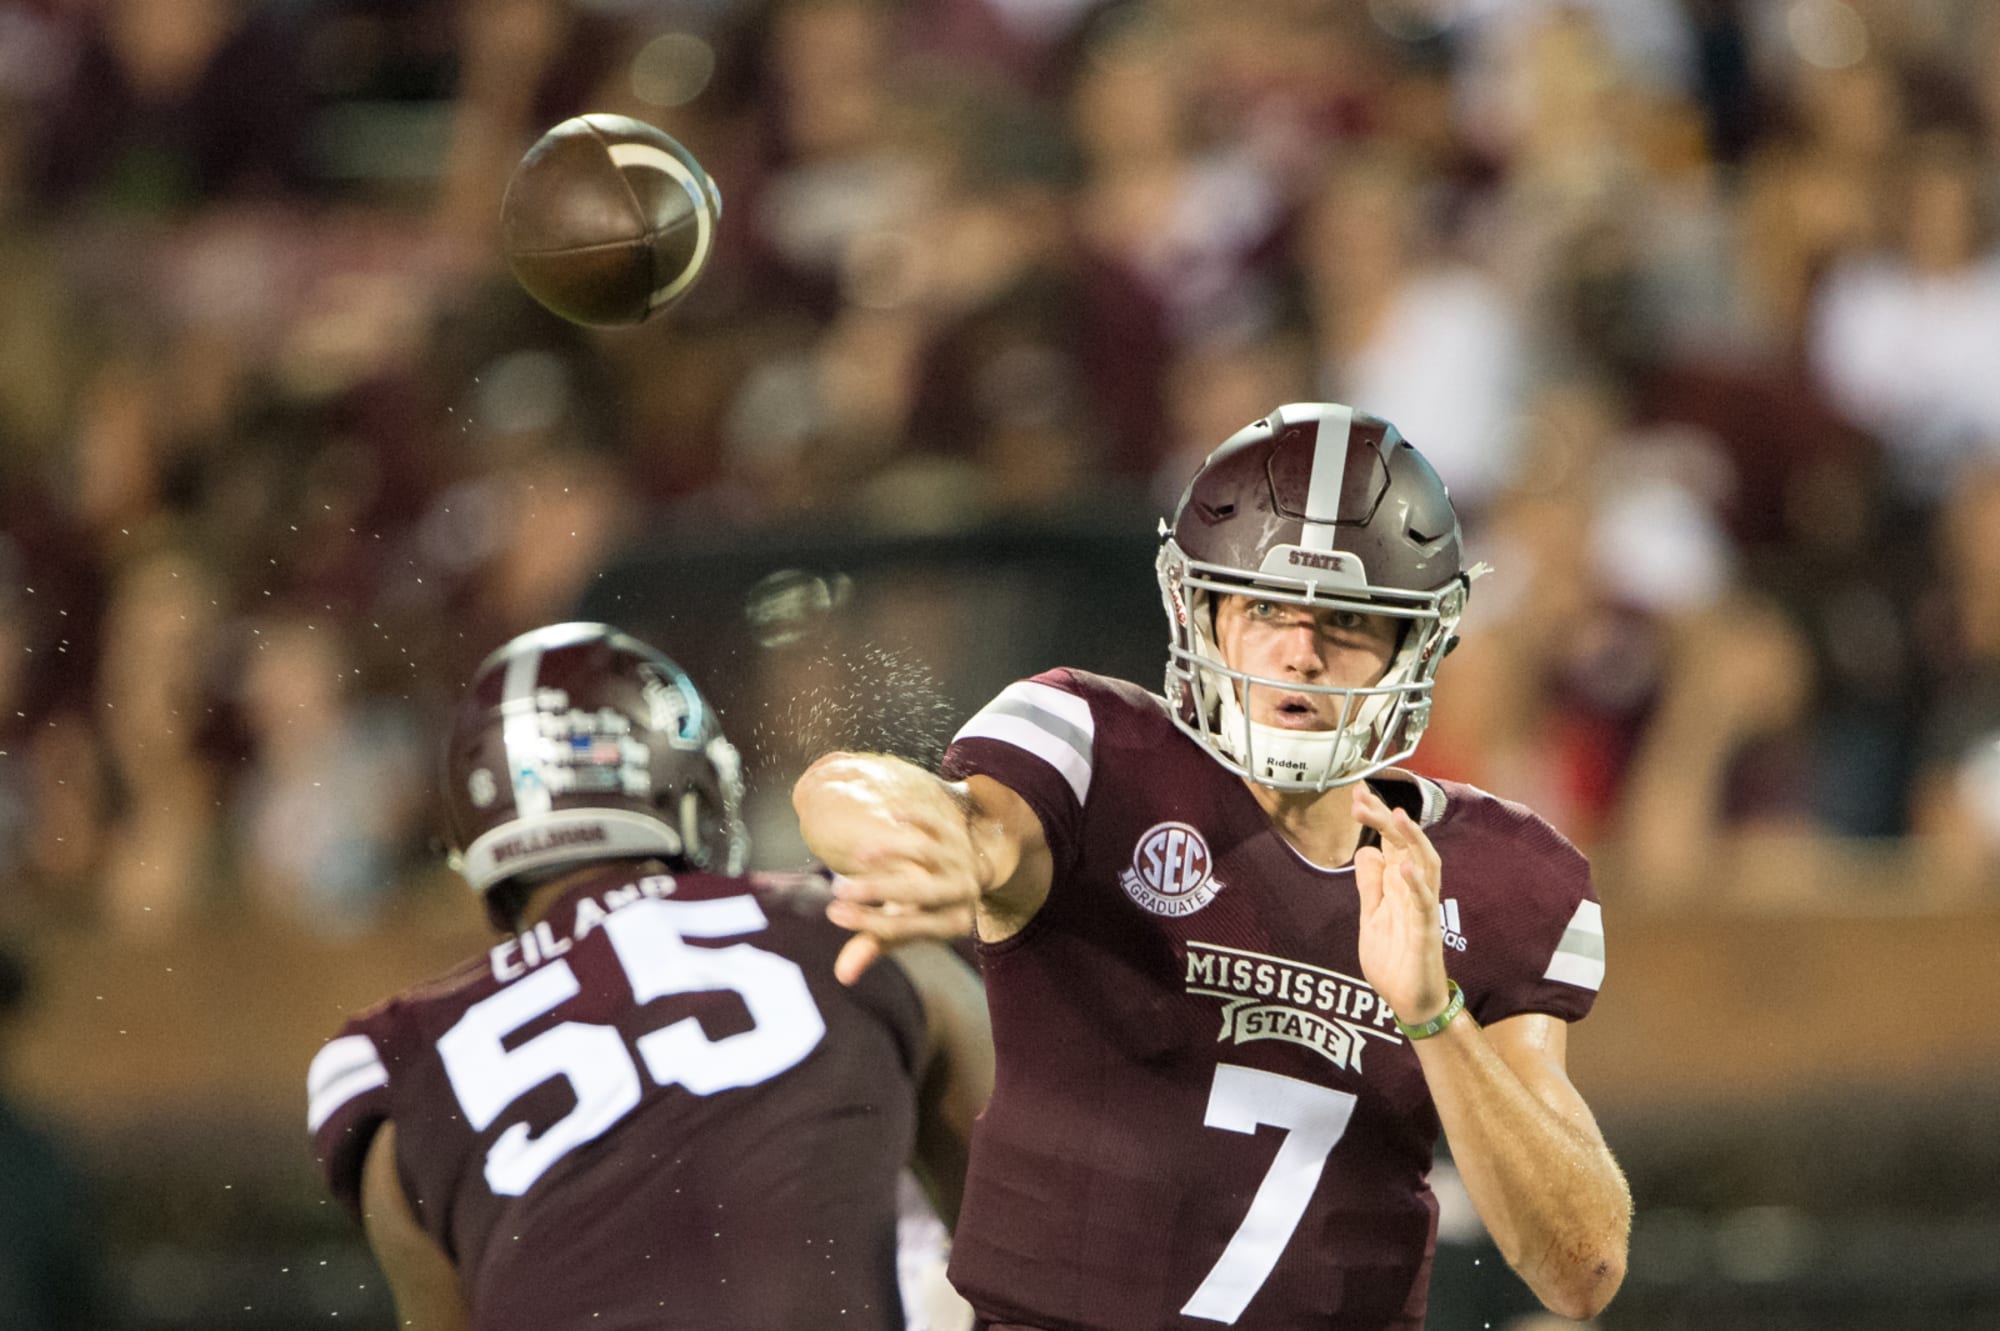 The Mississippi State football team has found itself trailing LSU by a scor...